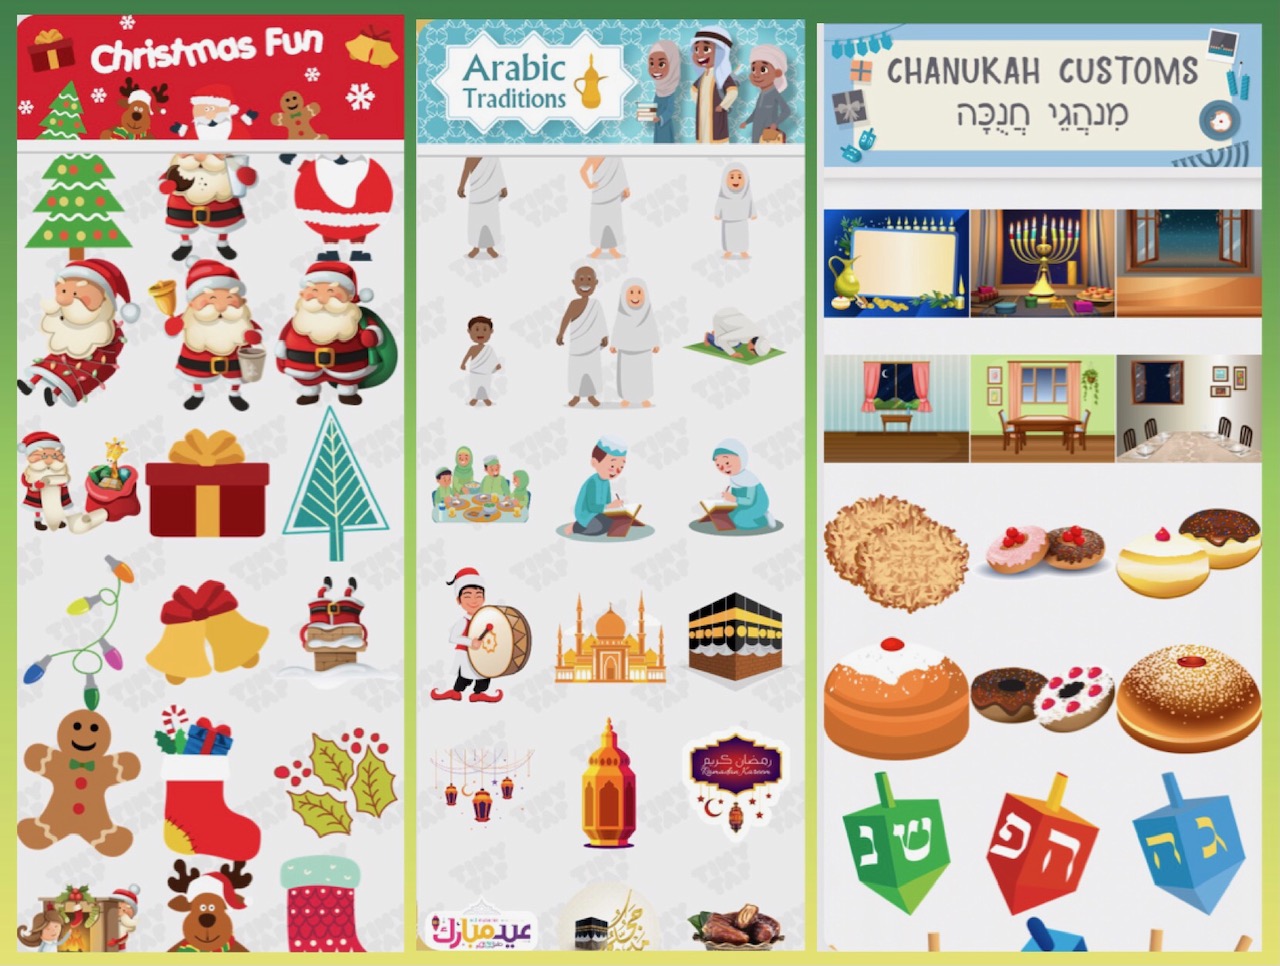 samples of holiday sticker packs in TinyTap and Ji Tap